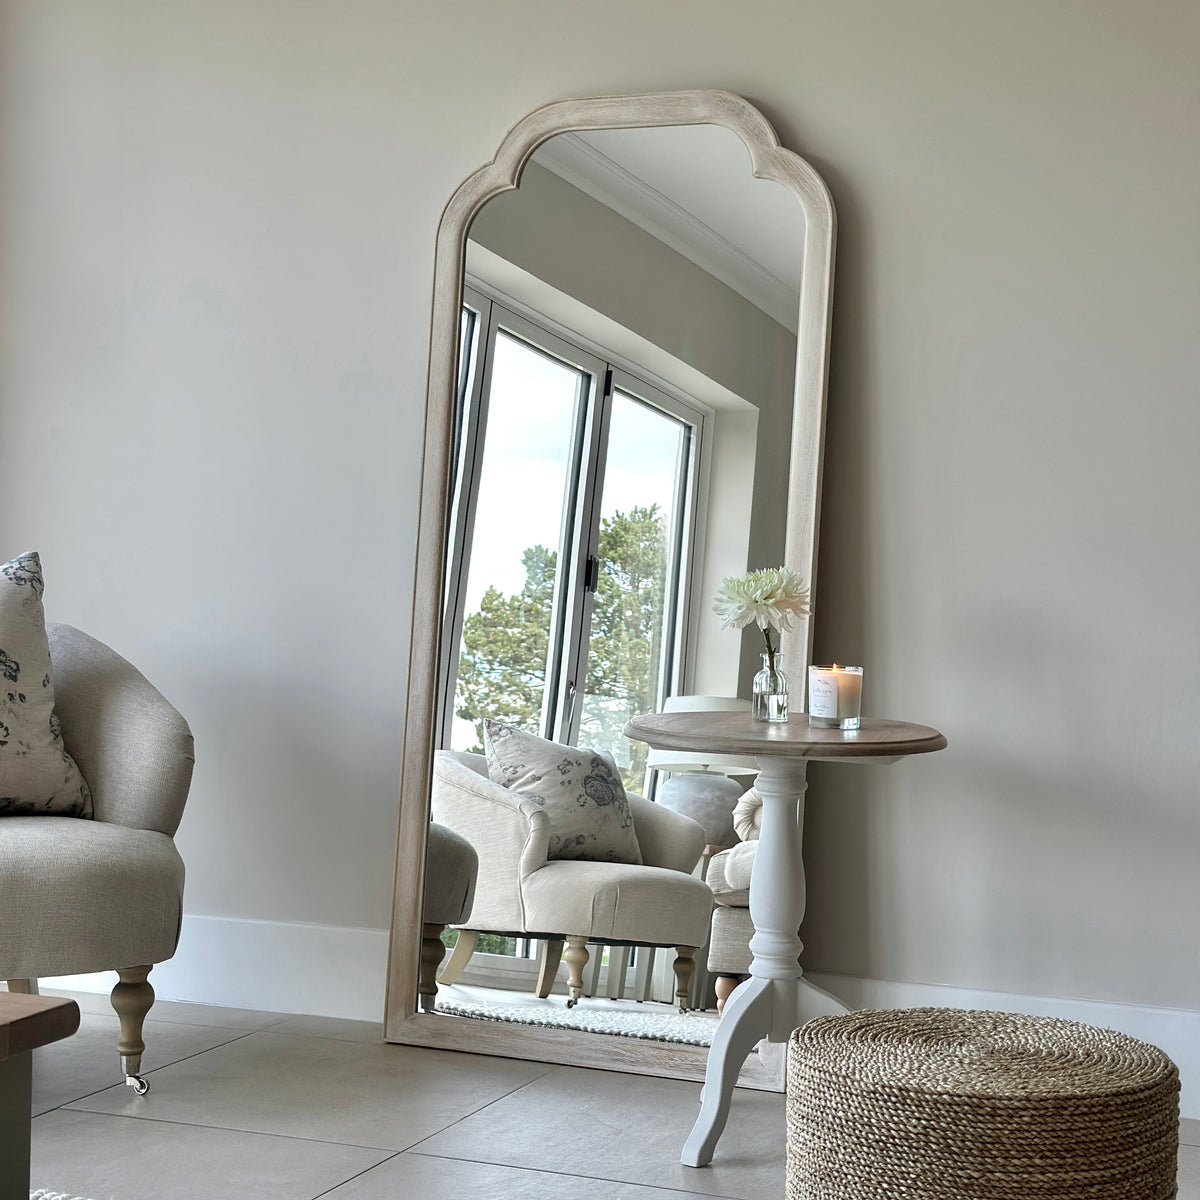 Full Length White Washed Wood Arched Mirror in living room